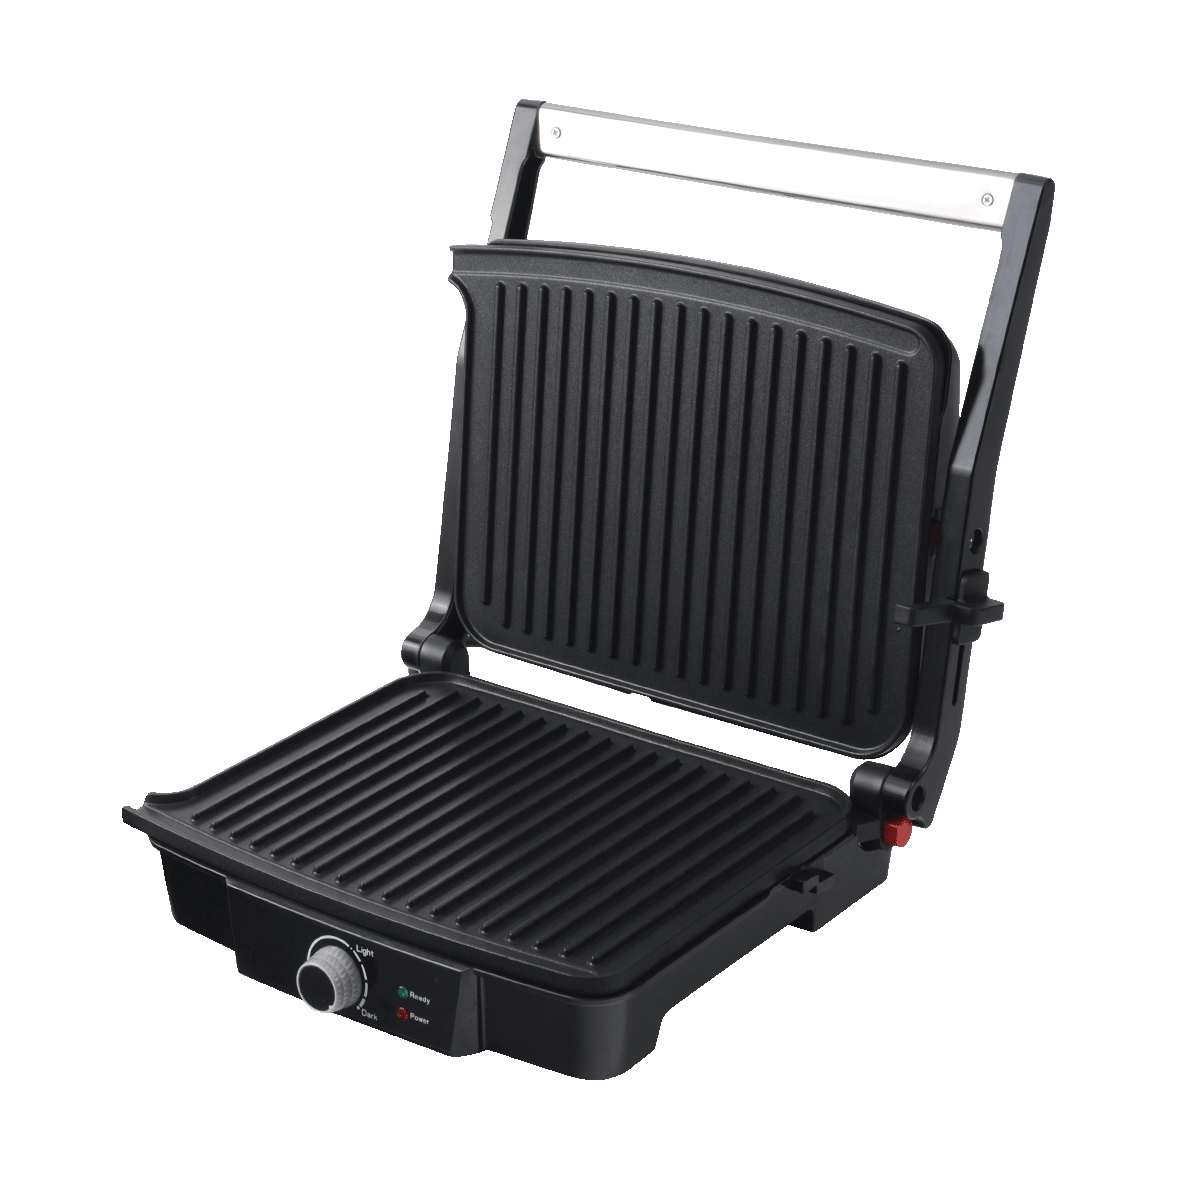 Contact grill KG 161 